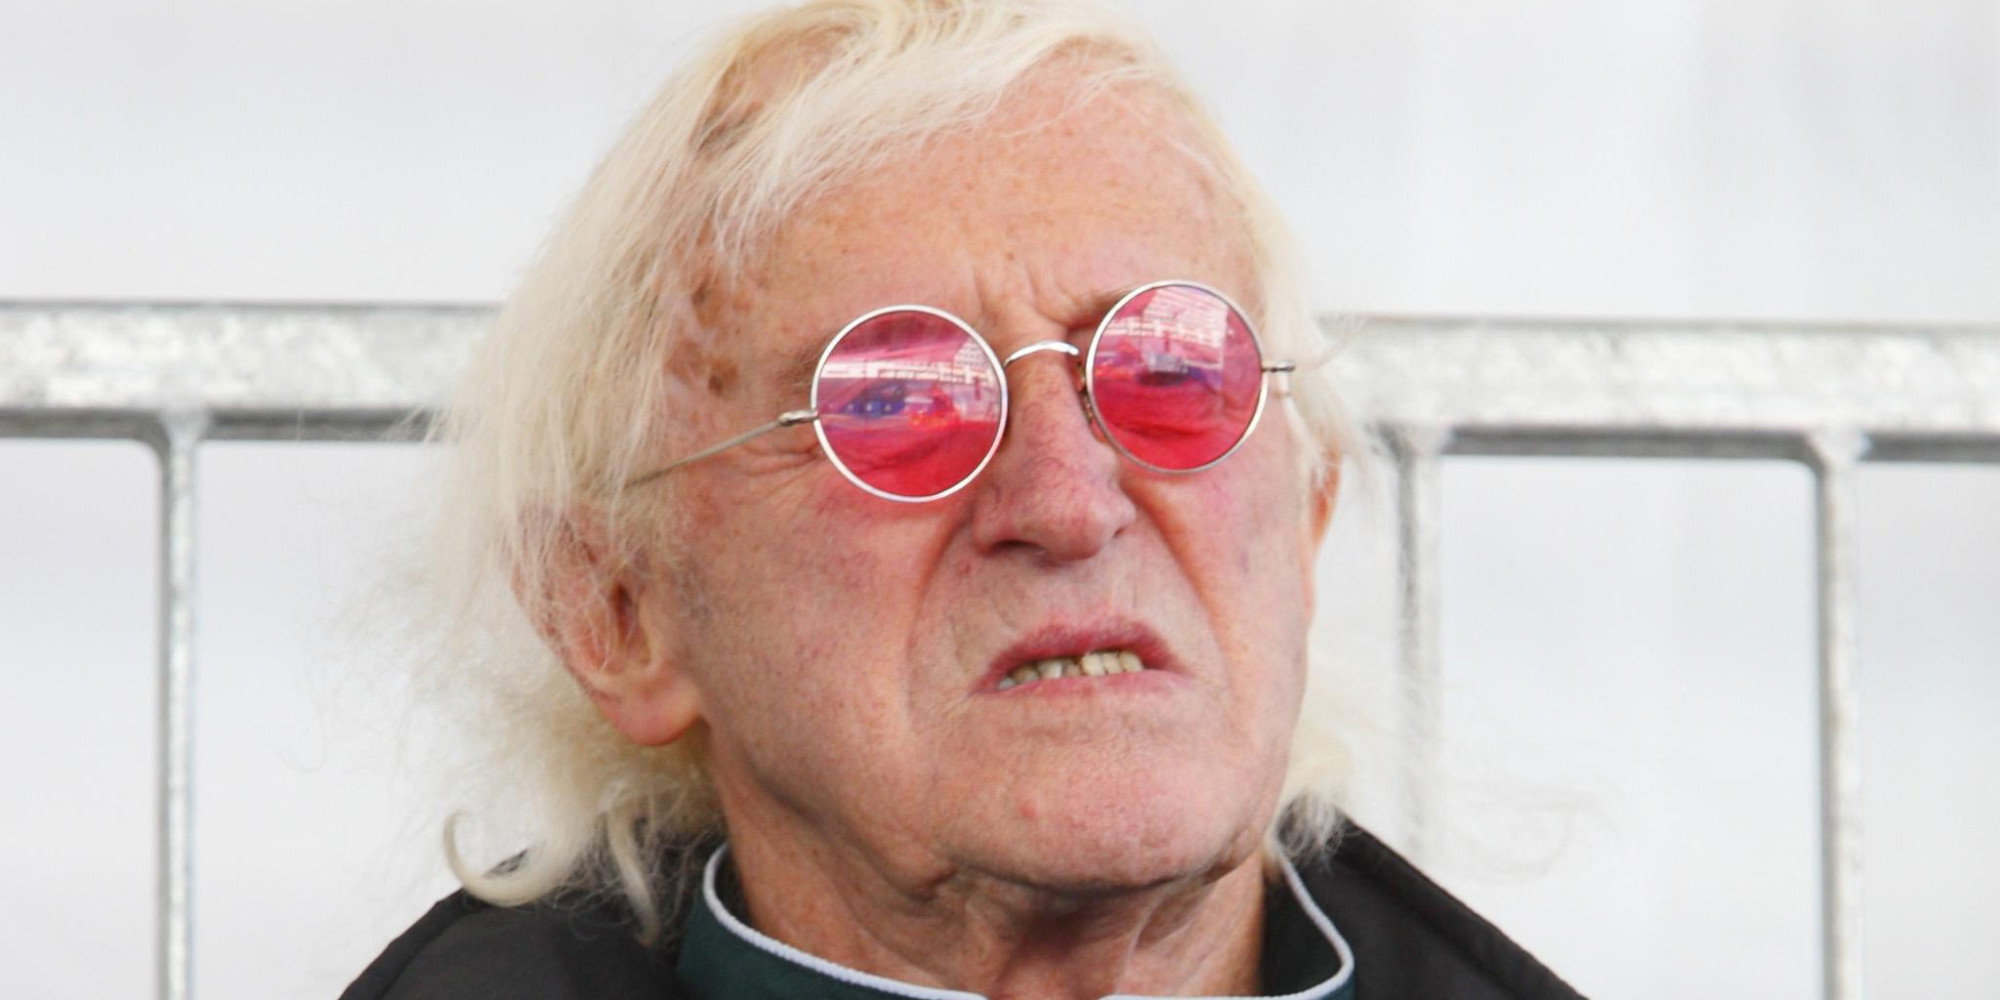 Jimmy Savile Interview From 1990 Reveals Disgraced Star's Apparent ...